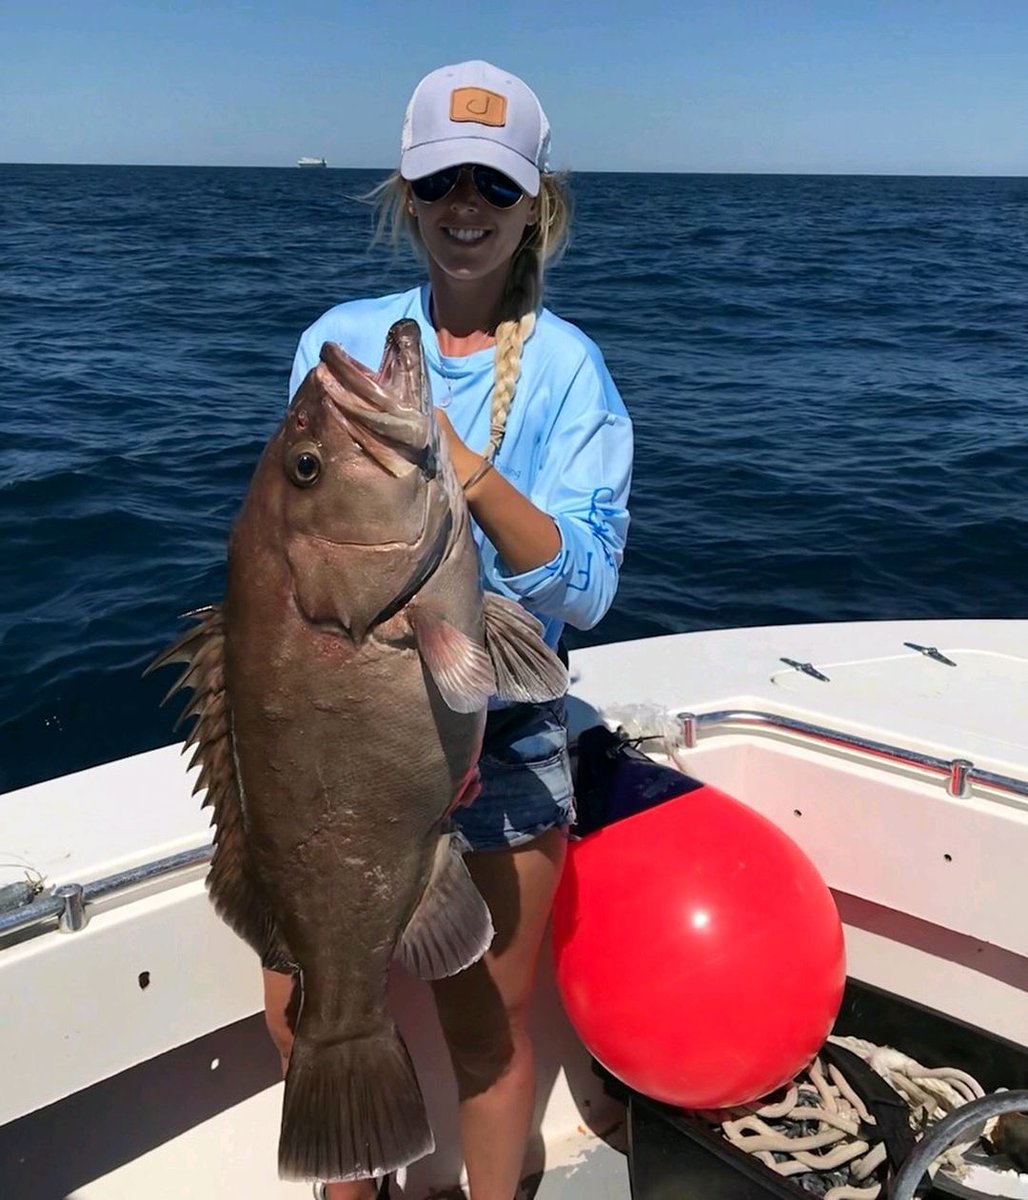 We have plenty of rigs for all types of fishing. 
•
#merrymarlin #contenderboats #grouperfishing #offshore #deepdropping #snowygrouper #fishventures #messybungettingthingsdone #girlswhofish #gettingdowntobusiness #seewhatsoutthere #whatgetsyououtdoors #letitsnow